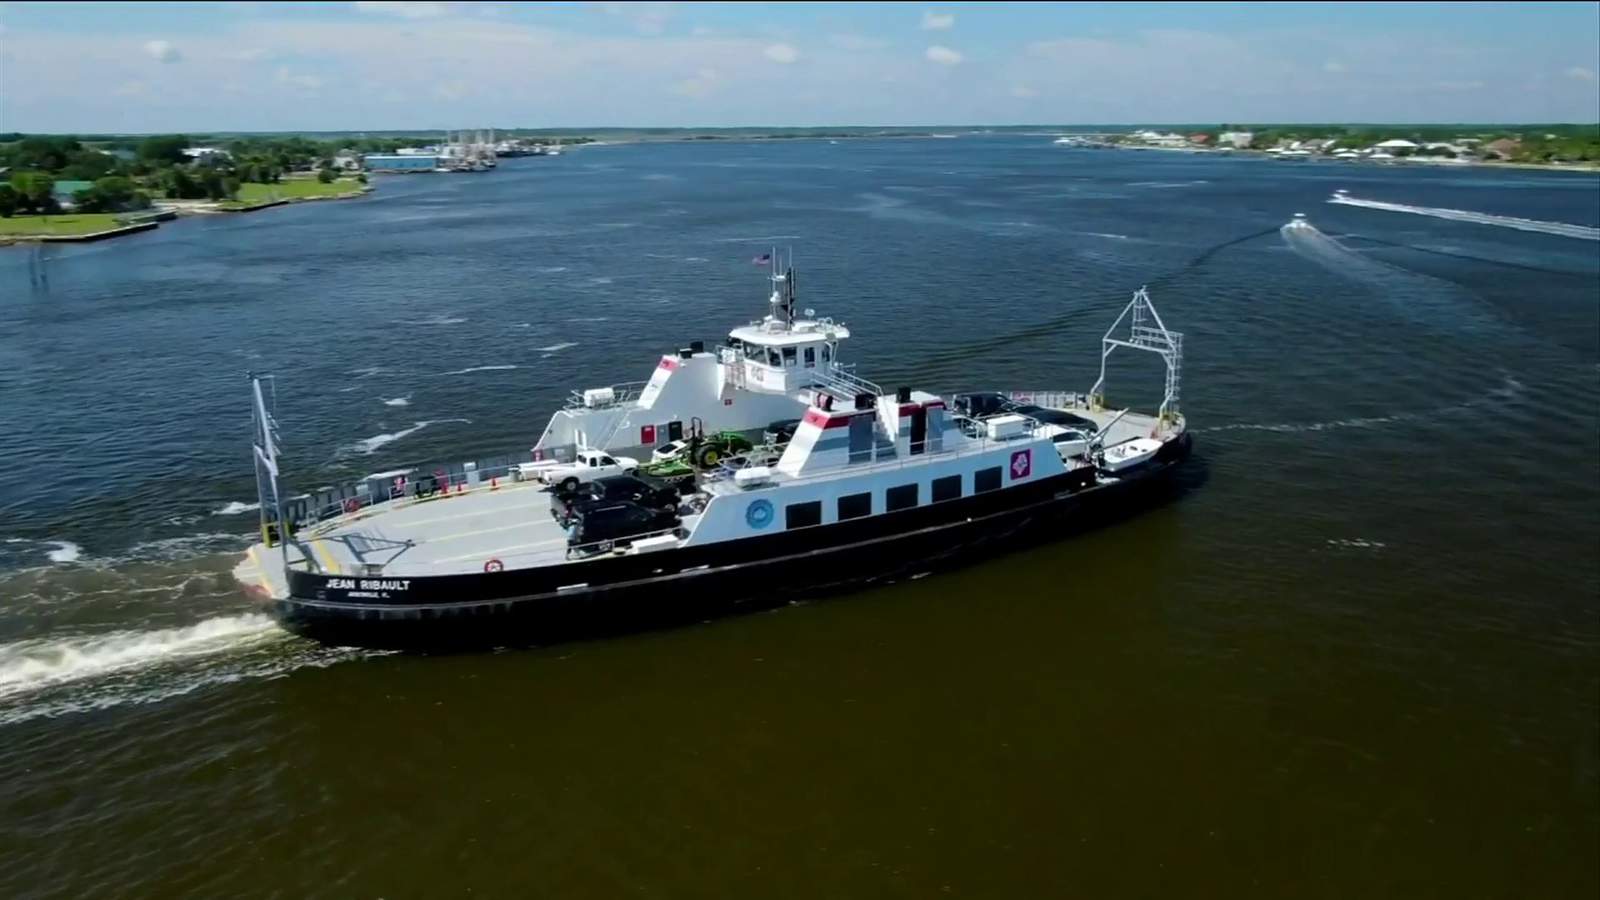 St. Johns River Ferry returns to service after multi-million dollar improvements, upgrades